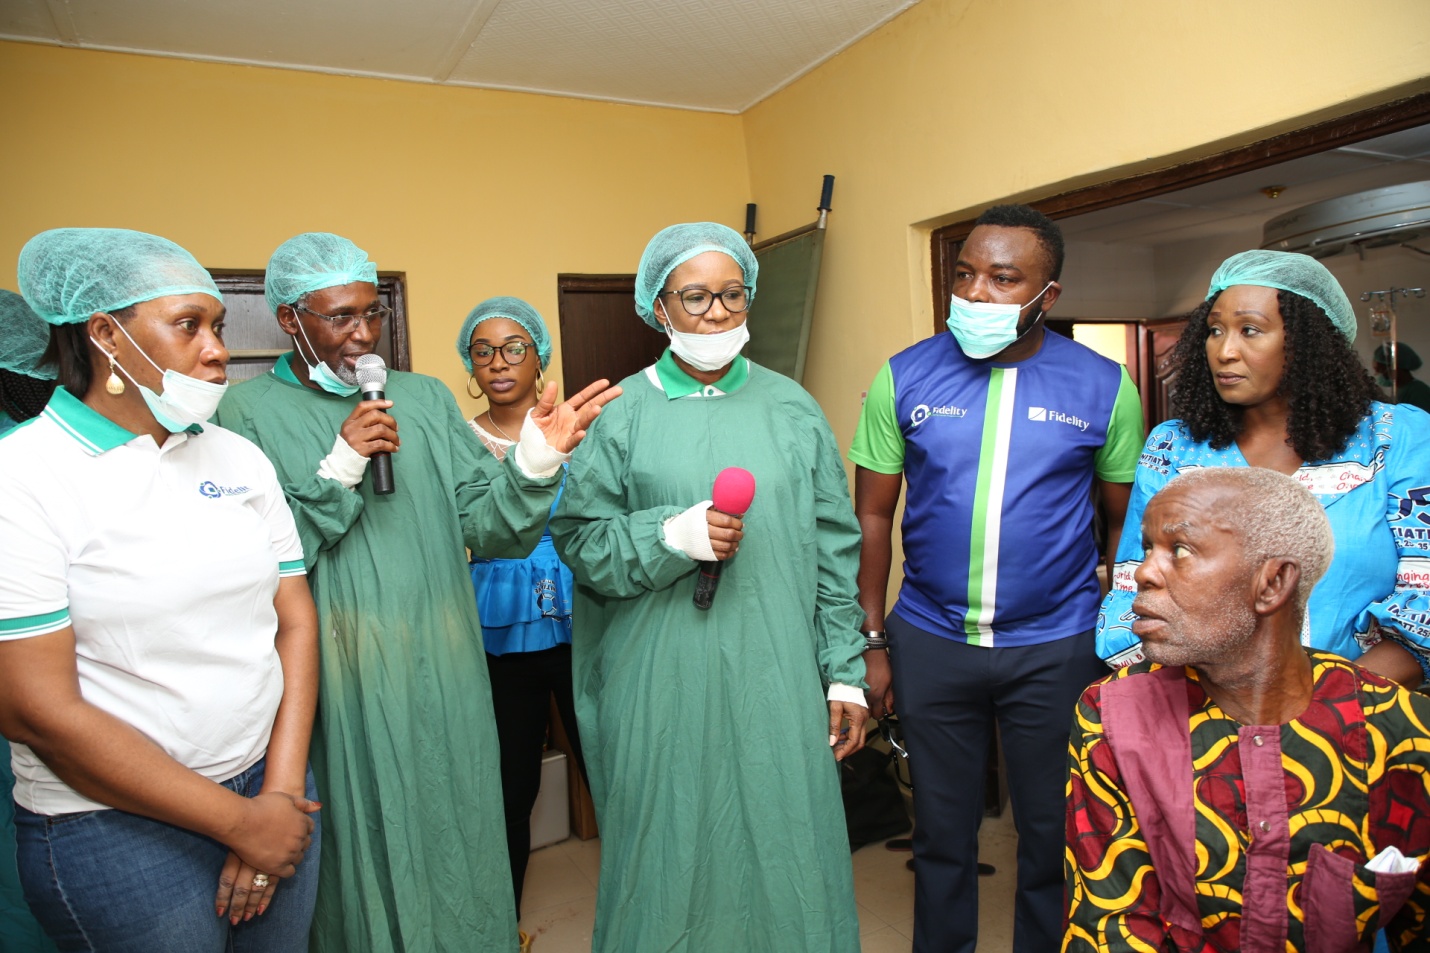 Wife of Delta Governor and founder O5 Initiative, Dame Edith Okowa (Middle), the Coordinator Restore Sight Africa Initiative, Dr. Ernest Ogbedo (2nd Left), the Head Cooperate Social Responsibility and Human Resource, Mr.Chris Nnakwe (3rd right), the Lead Doctor for Fidelity Helping hand Medical outreach, Dr. Olutayo Shola (Left), Others during the flag off of the Fidelity Medical Outreach in partnership with O5 Initiative held at Owa-Oyibu General Hospital in Ika North East Local Government Area of the State.